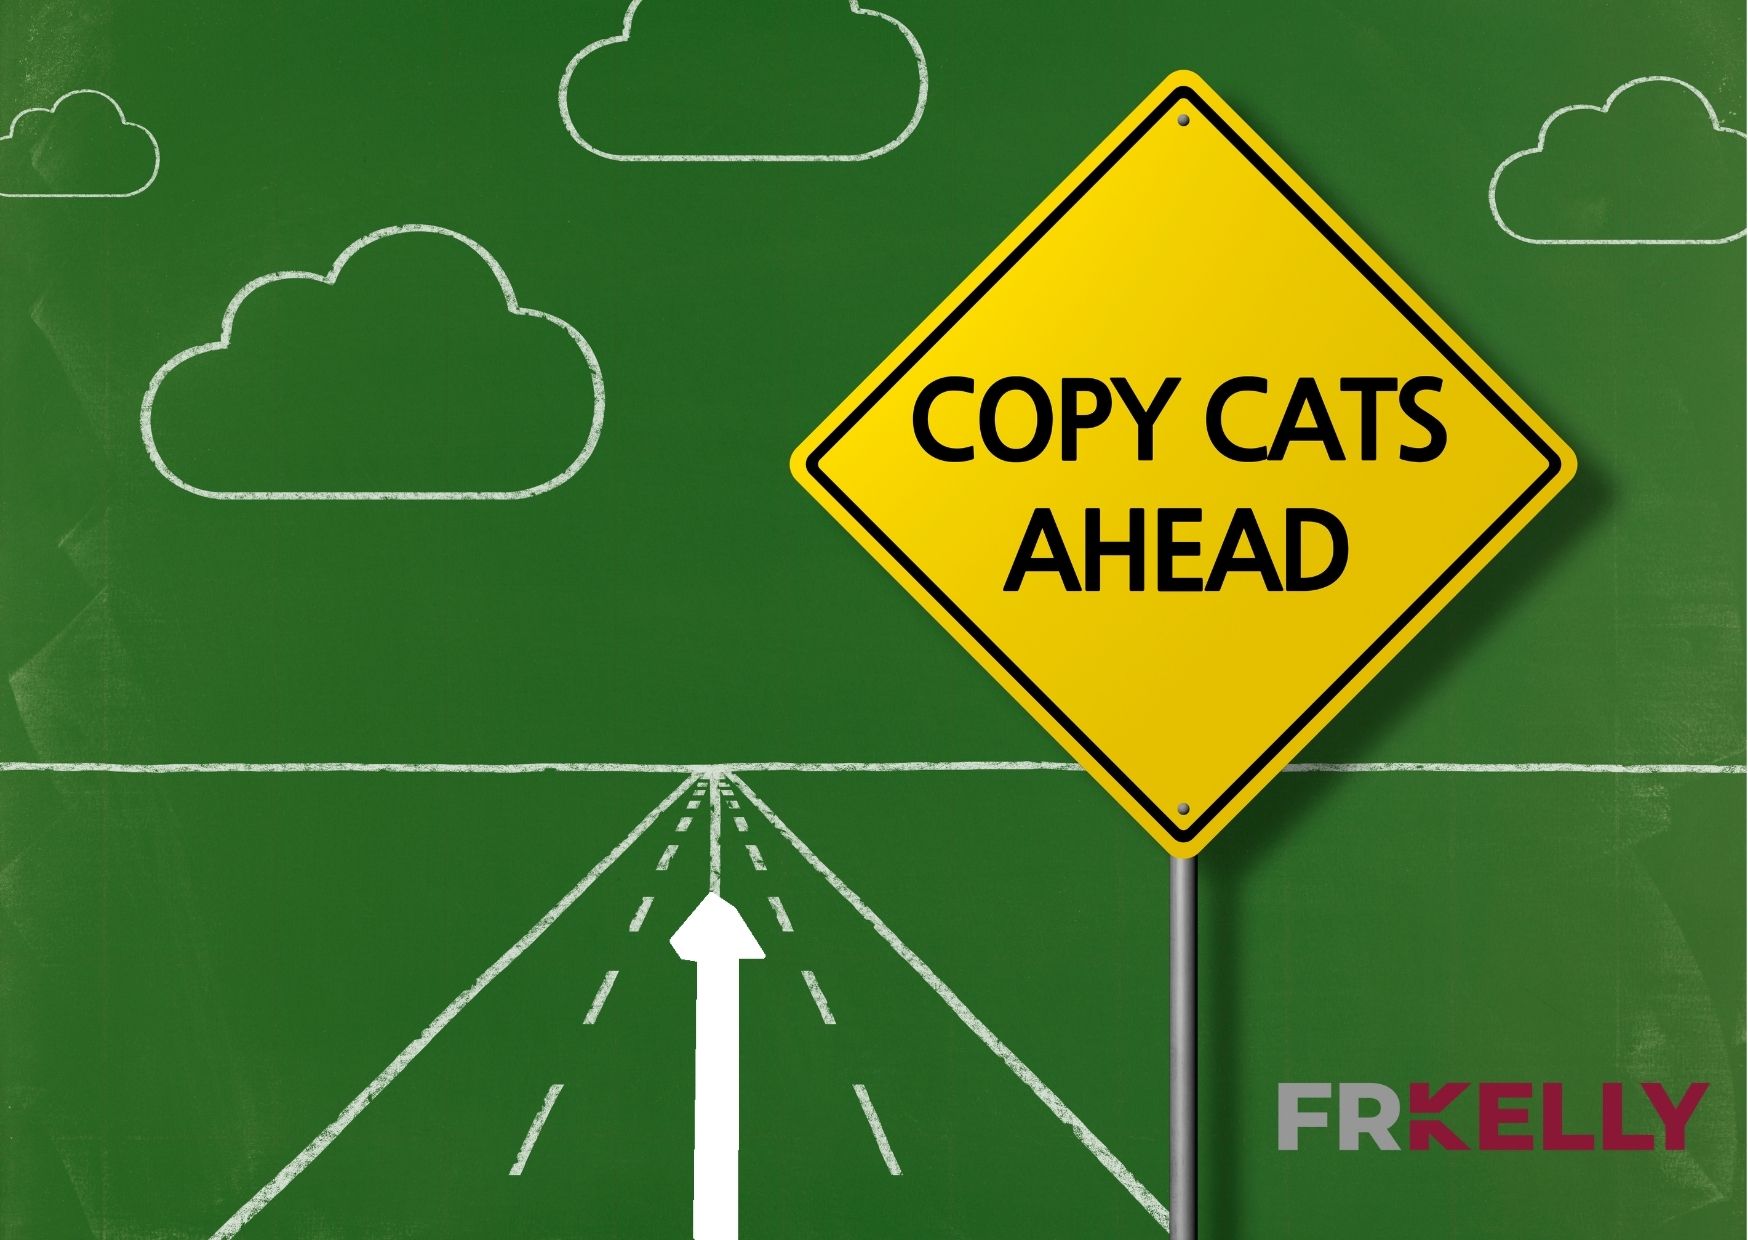 Copy cat road sign with open road ahead and FRKelly logo